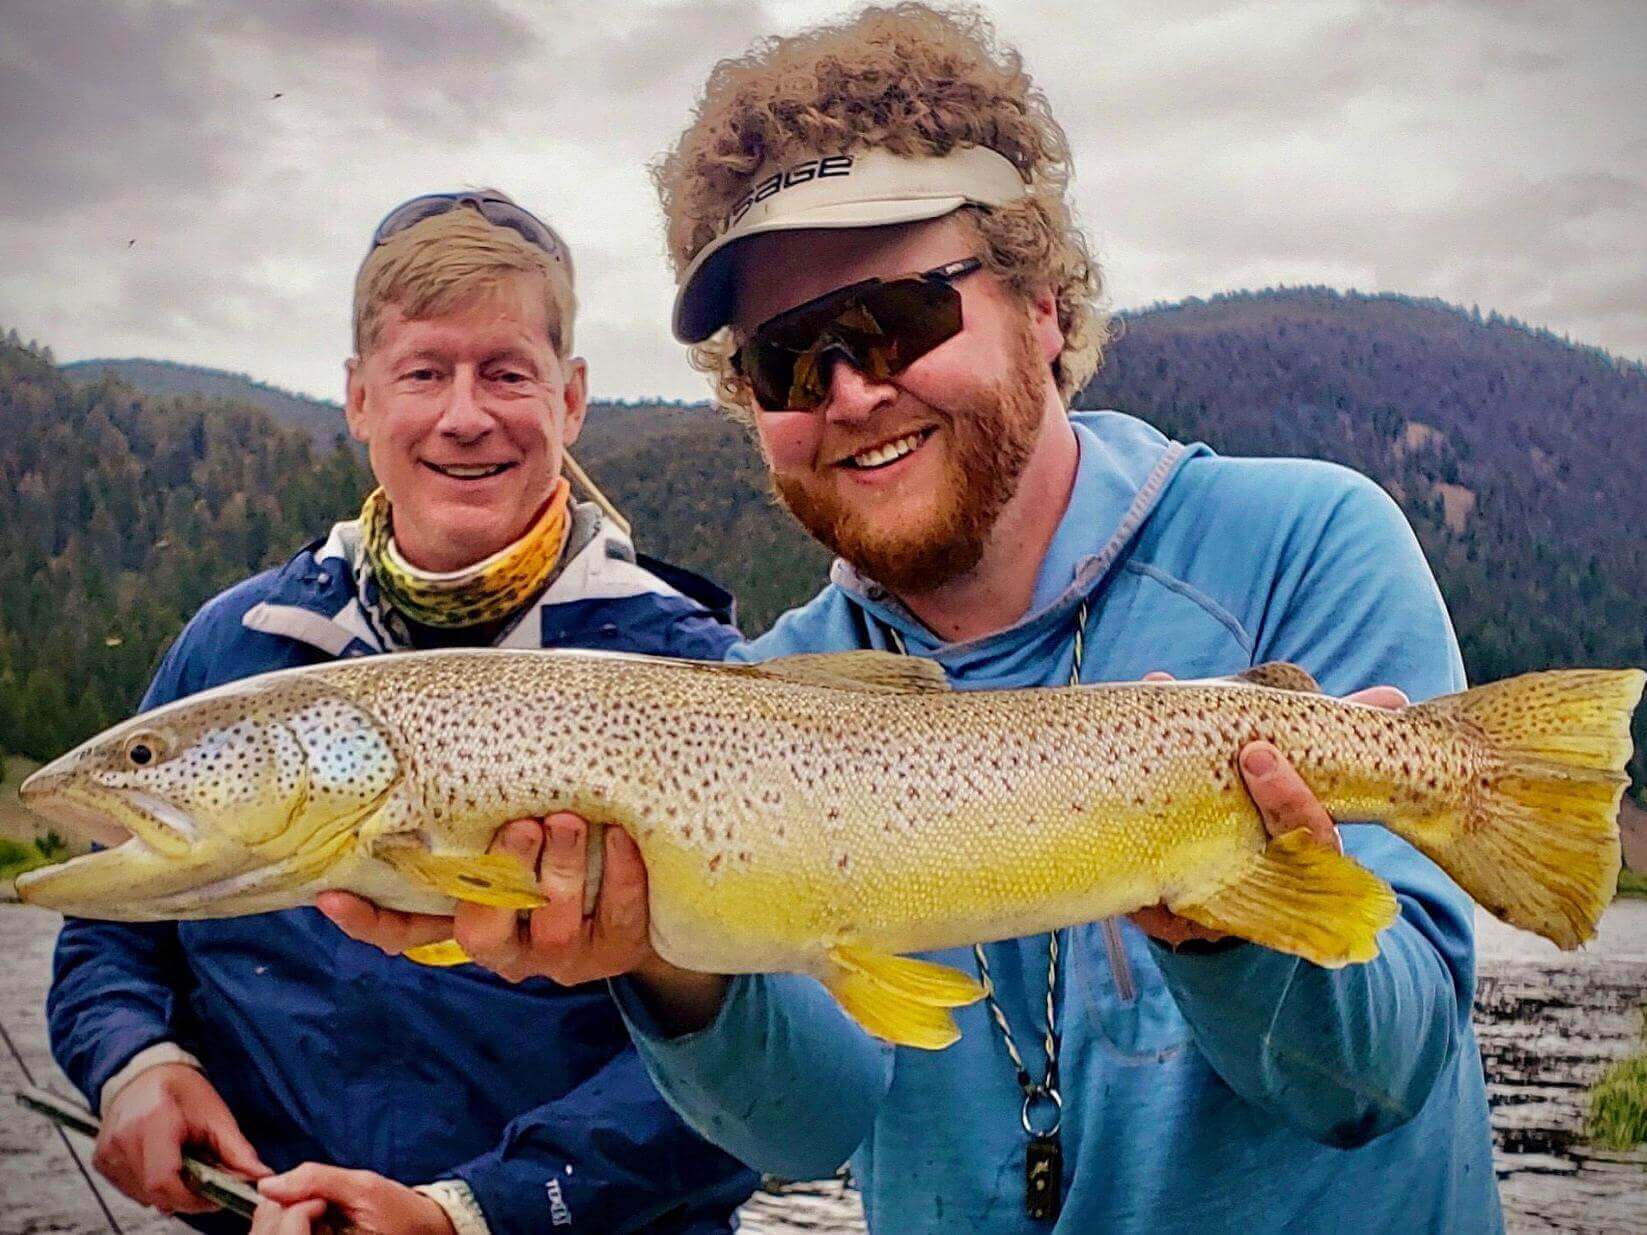 Fishing And Fly Fishing At Lower Mountain Fork River